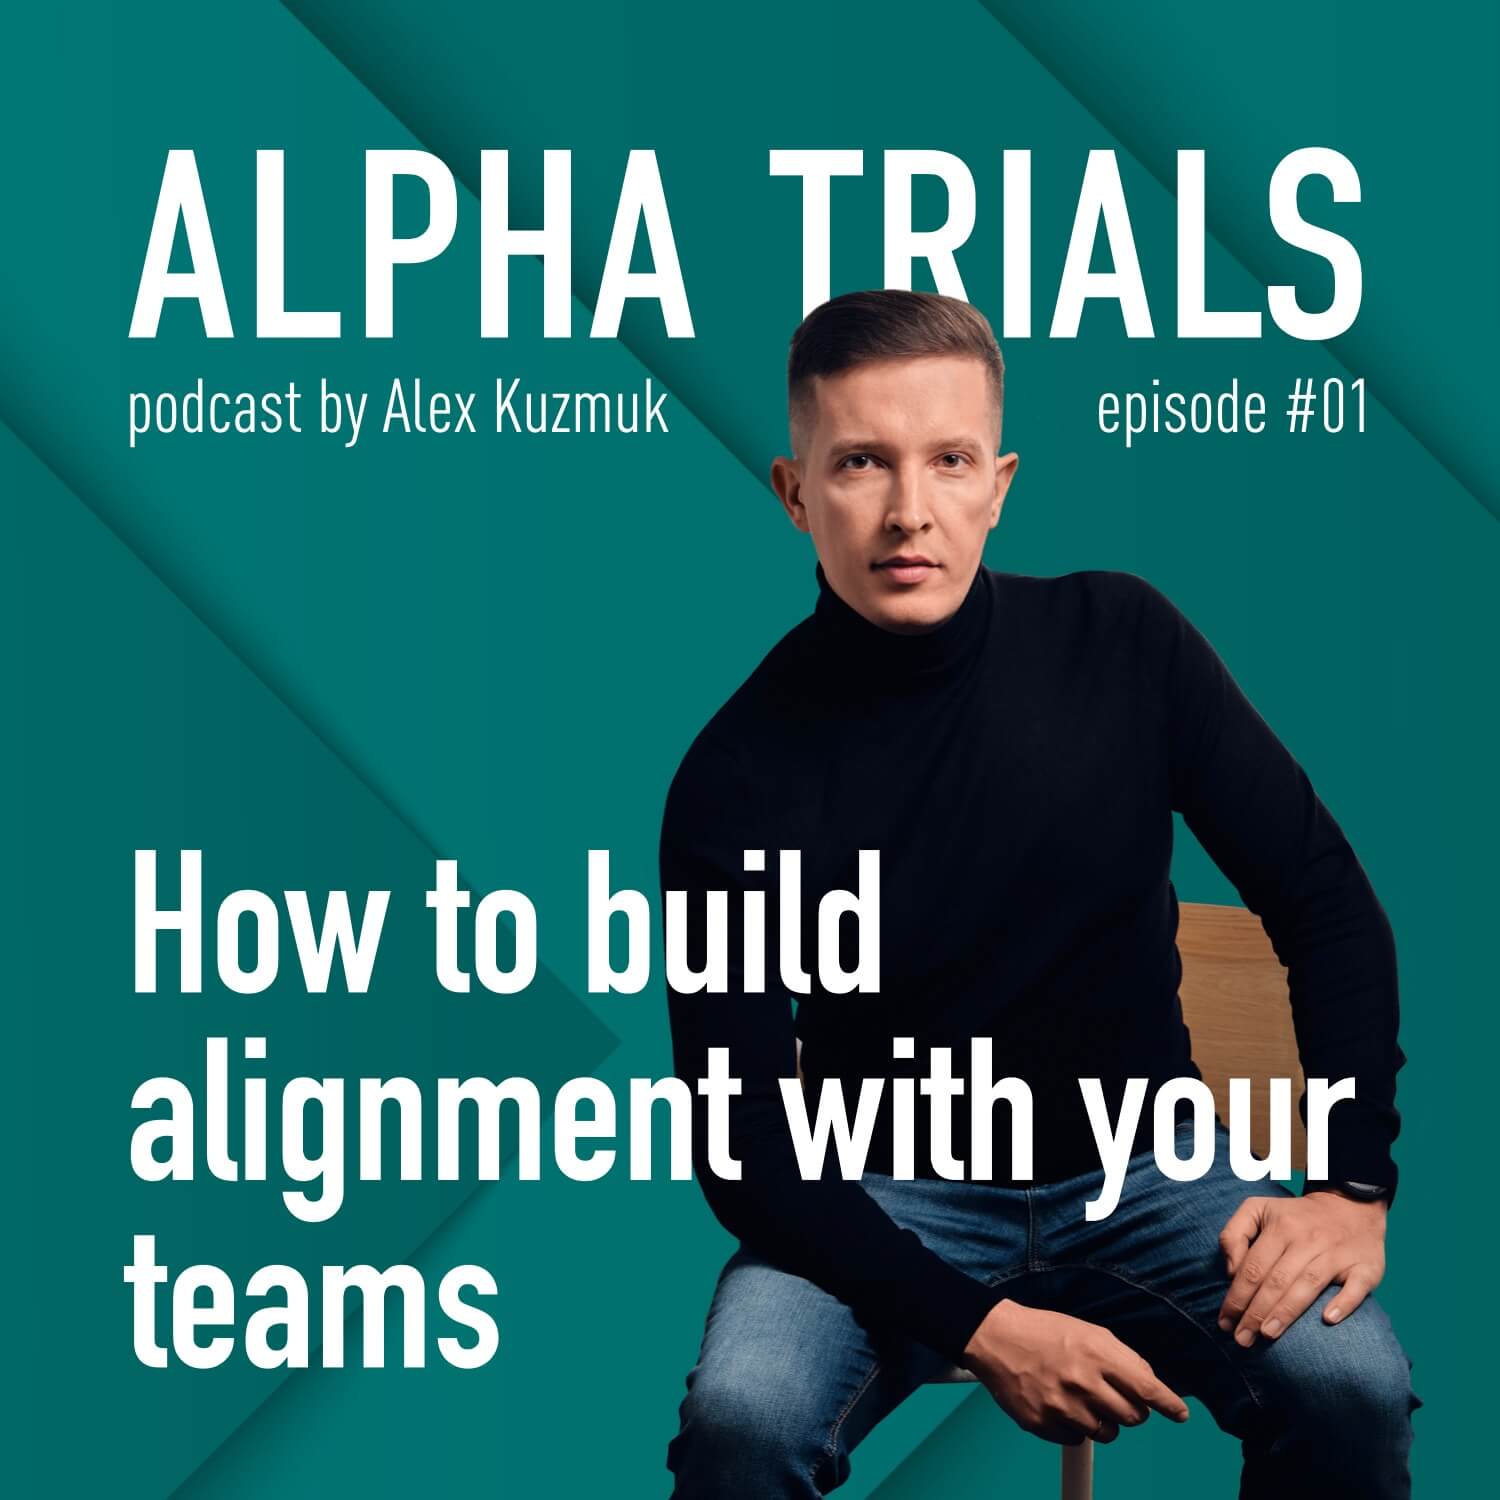 How to build alignment with your teams